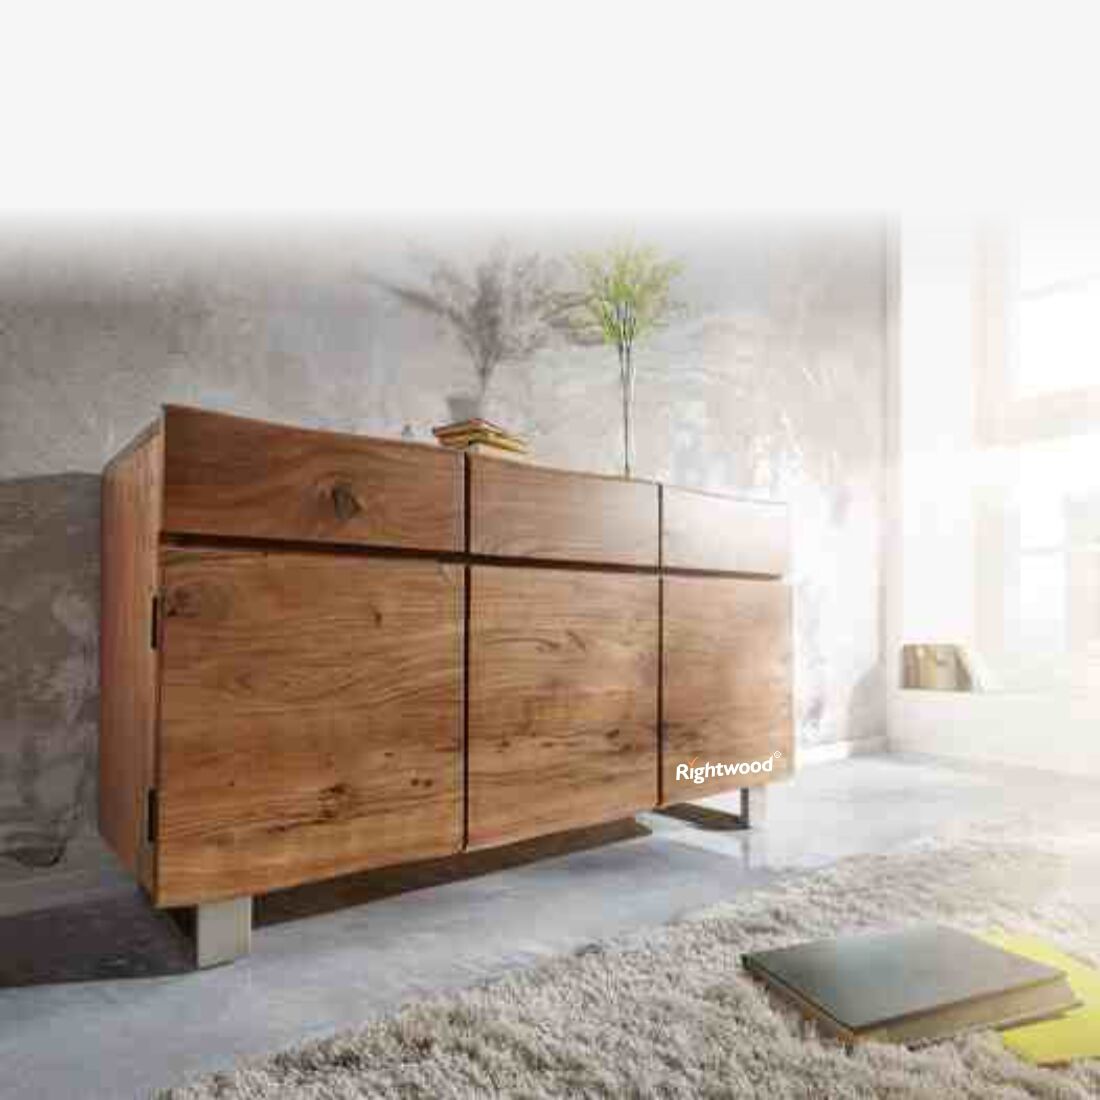 Wooden sideboard live edge shades